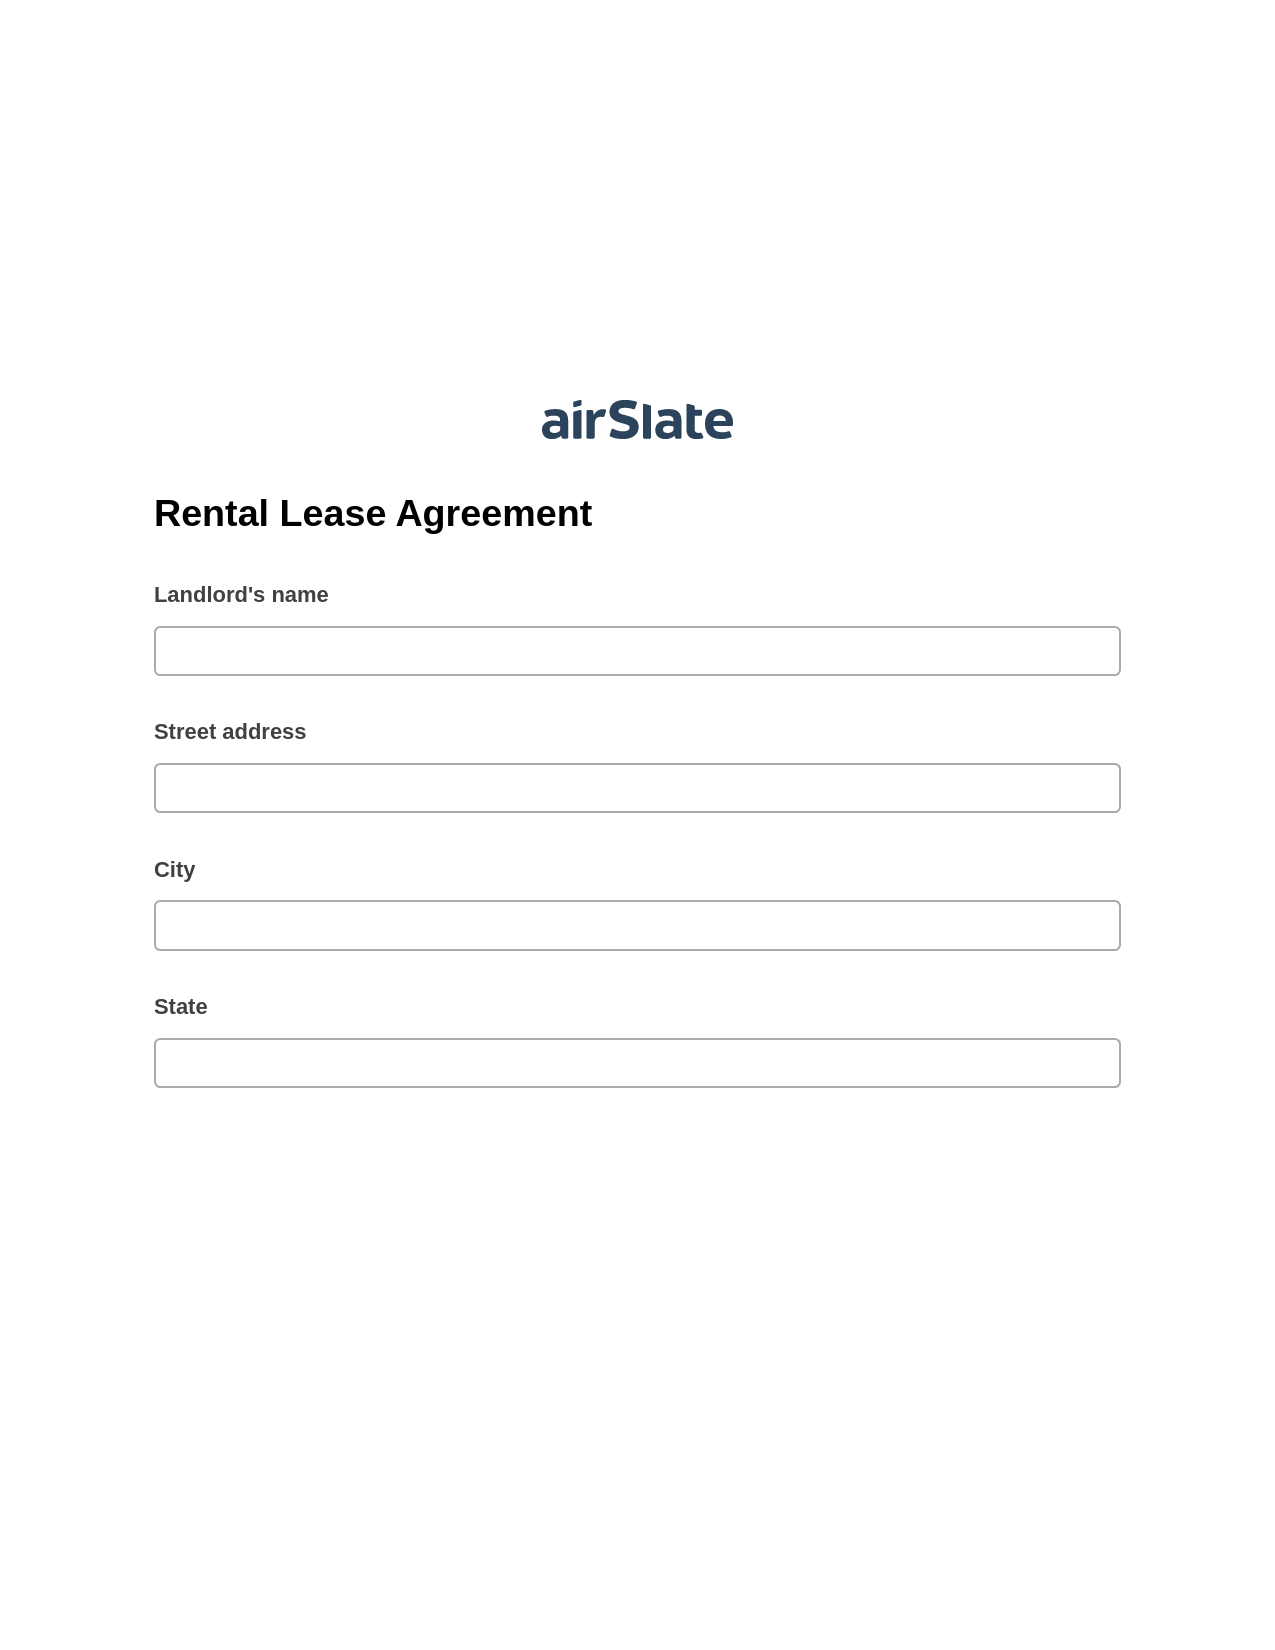 Rental Lease Agreement Pre-fill Slate from MS Dynamics 365 Records Bot, Jira Bot, Export to Smartsheet